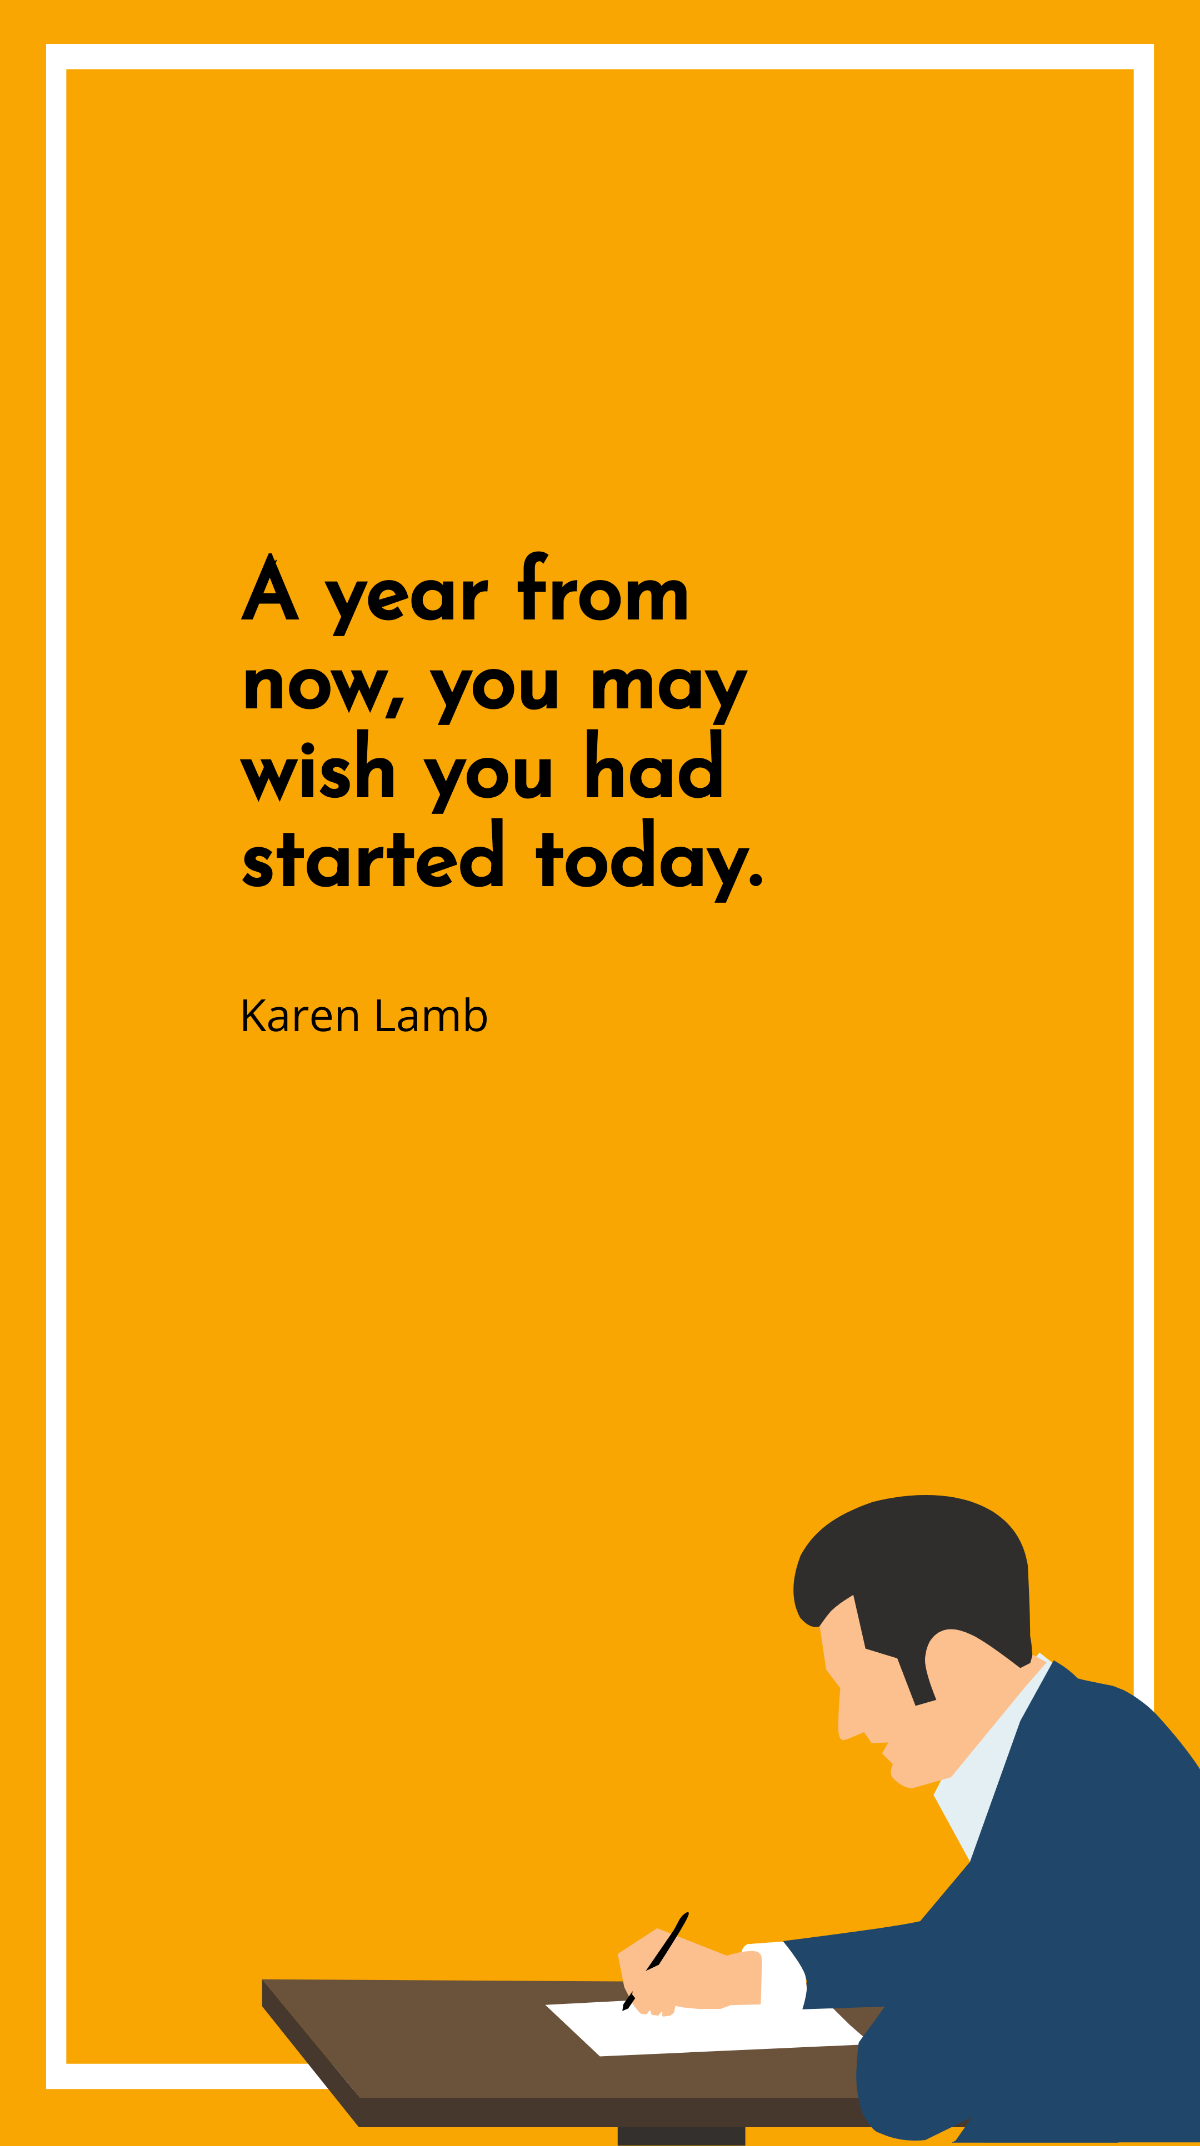 Karen Lamb - A year from now, you may wish you had started today. Template